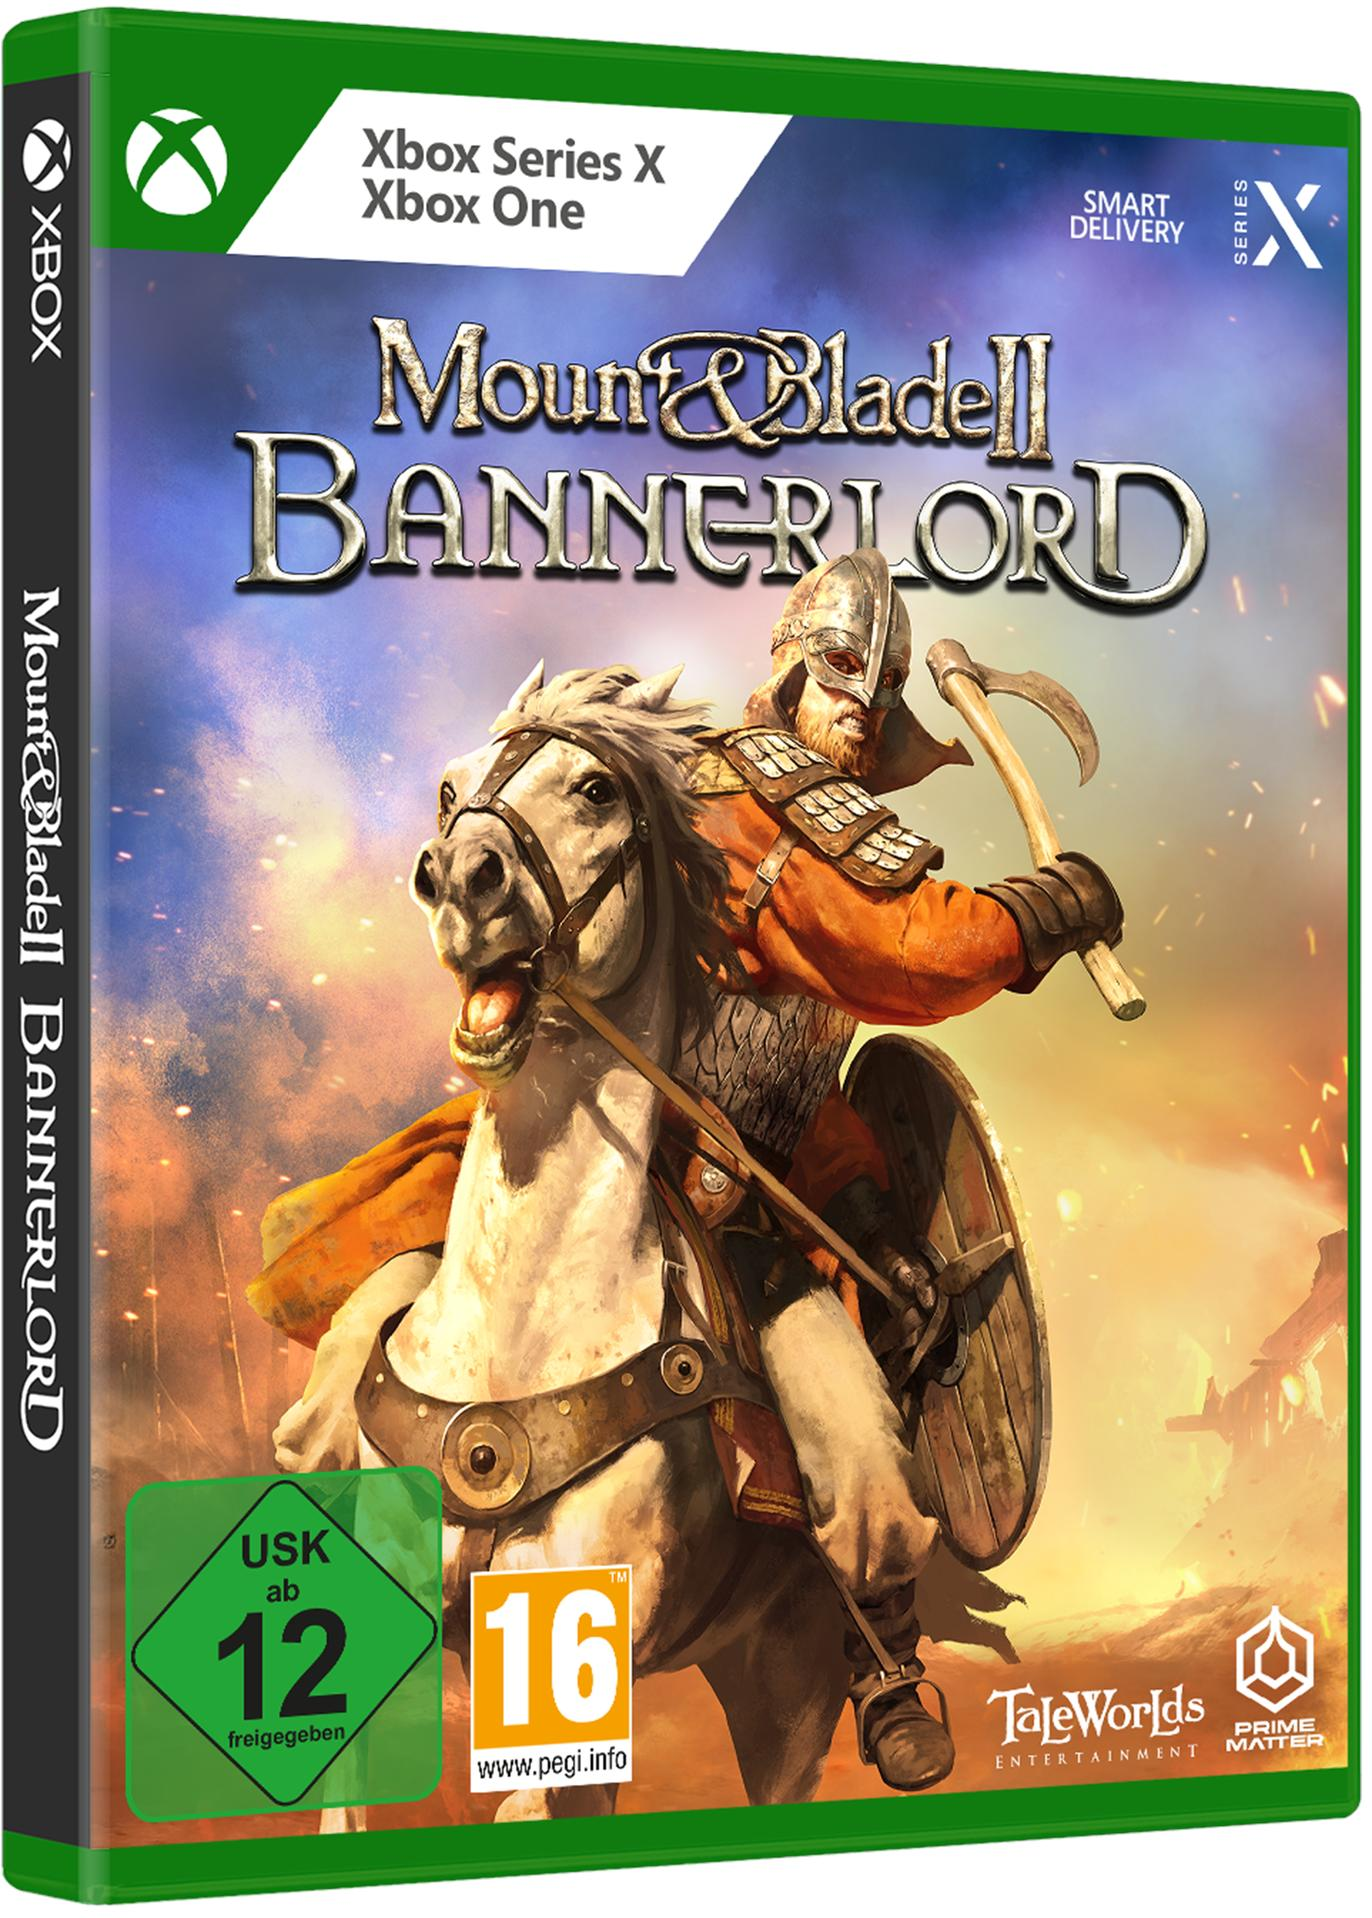 One & Series Xbox [Xbox - Blade X] & Bannerlord 2: Mount